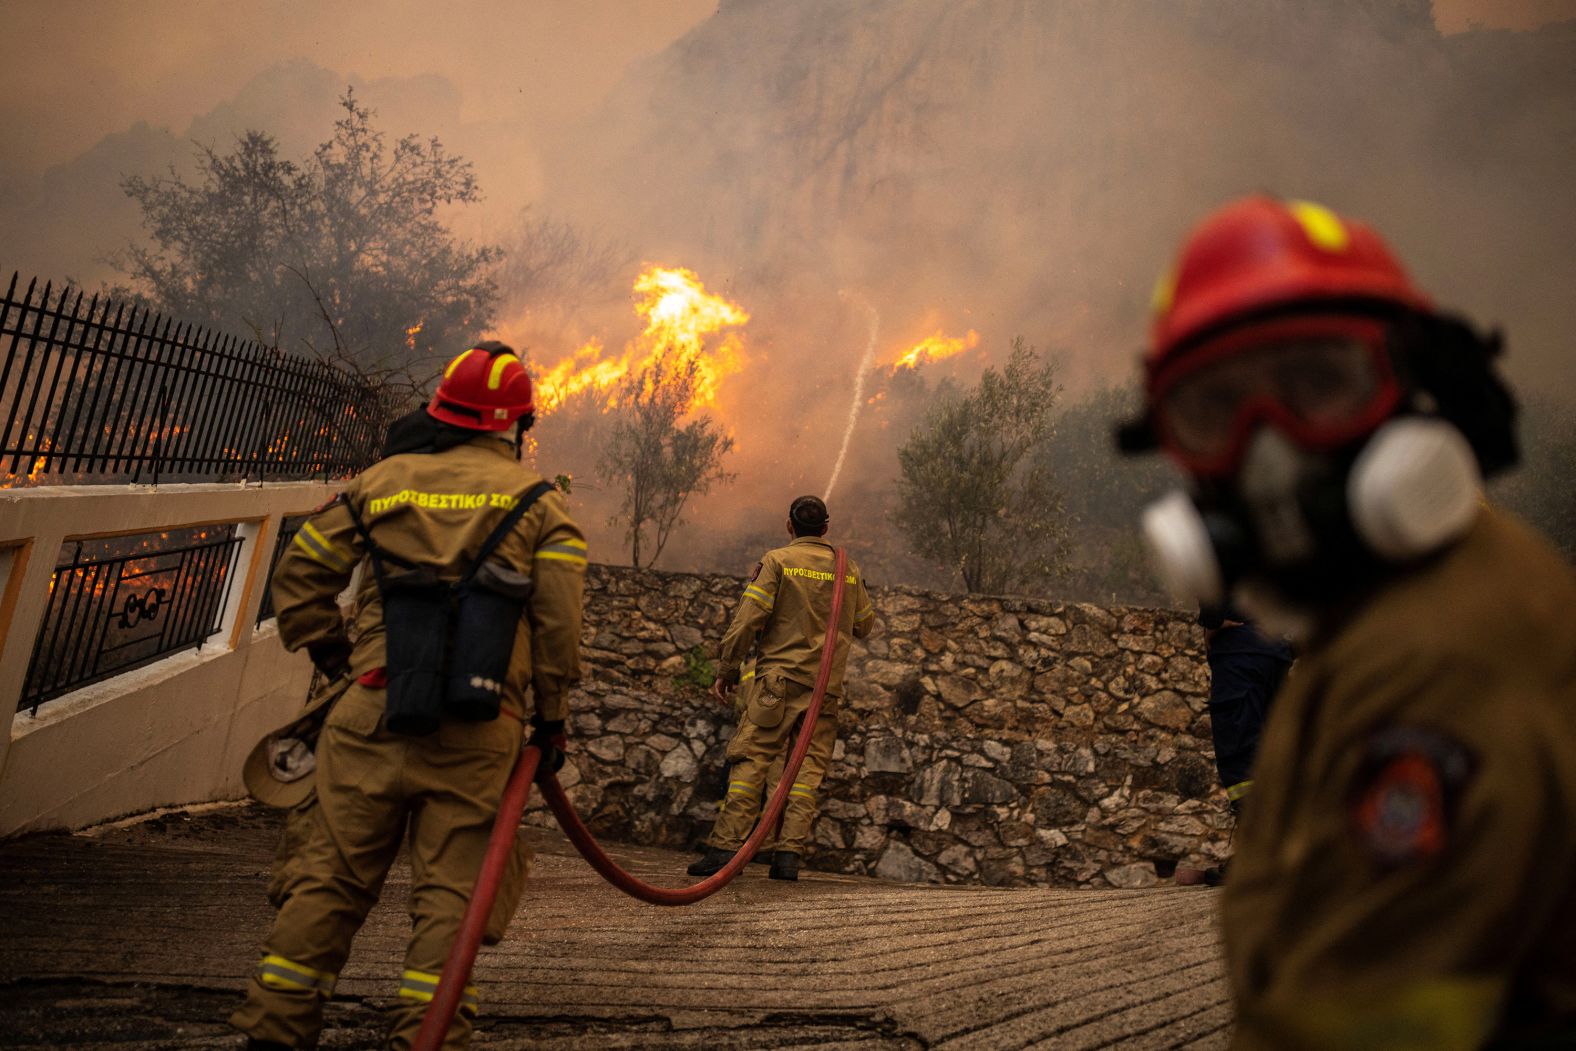 Firefighters take on a wildfire burning in Hasia on August 22.